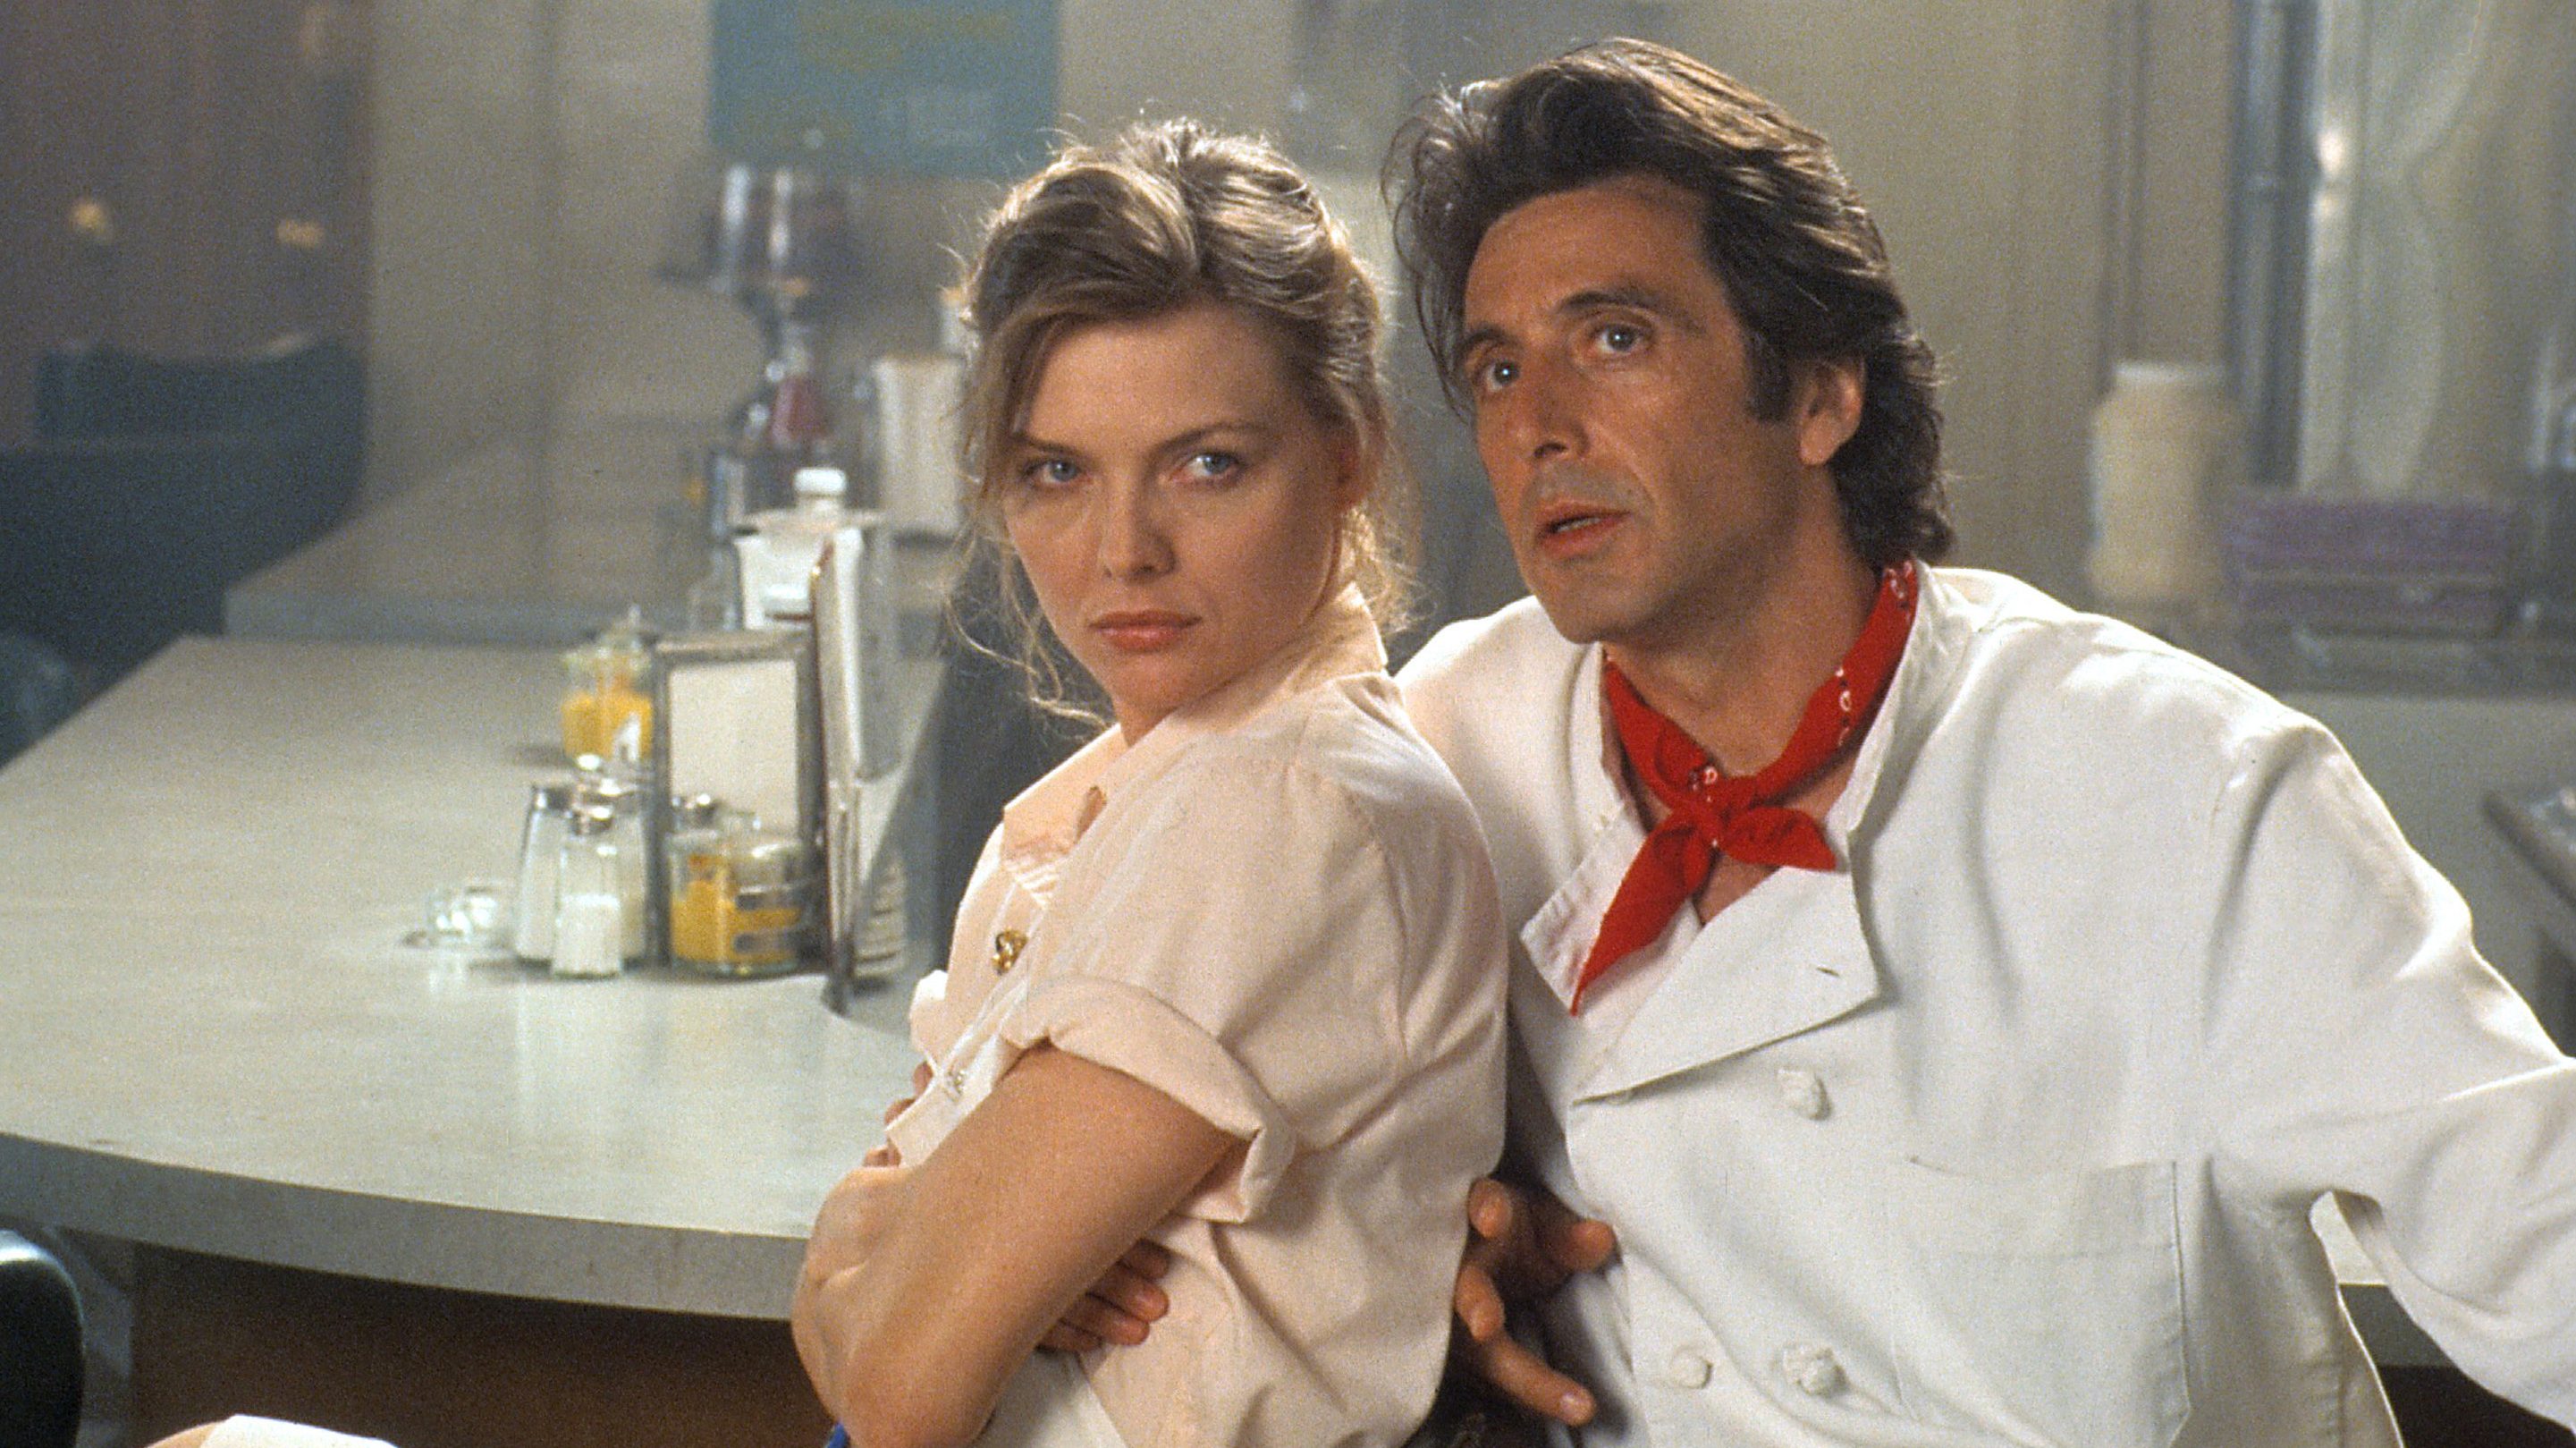 Michelle Pfeiffer and Al Pacino in Frankie And Johnny, 1991